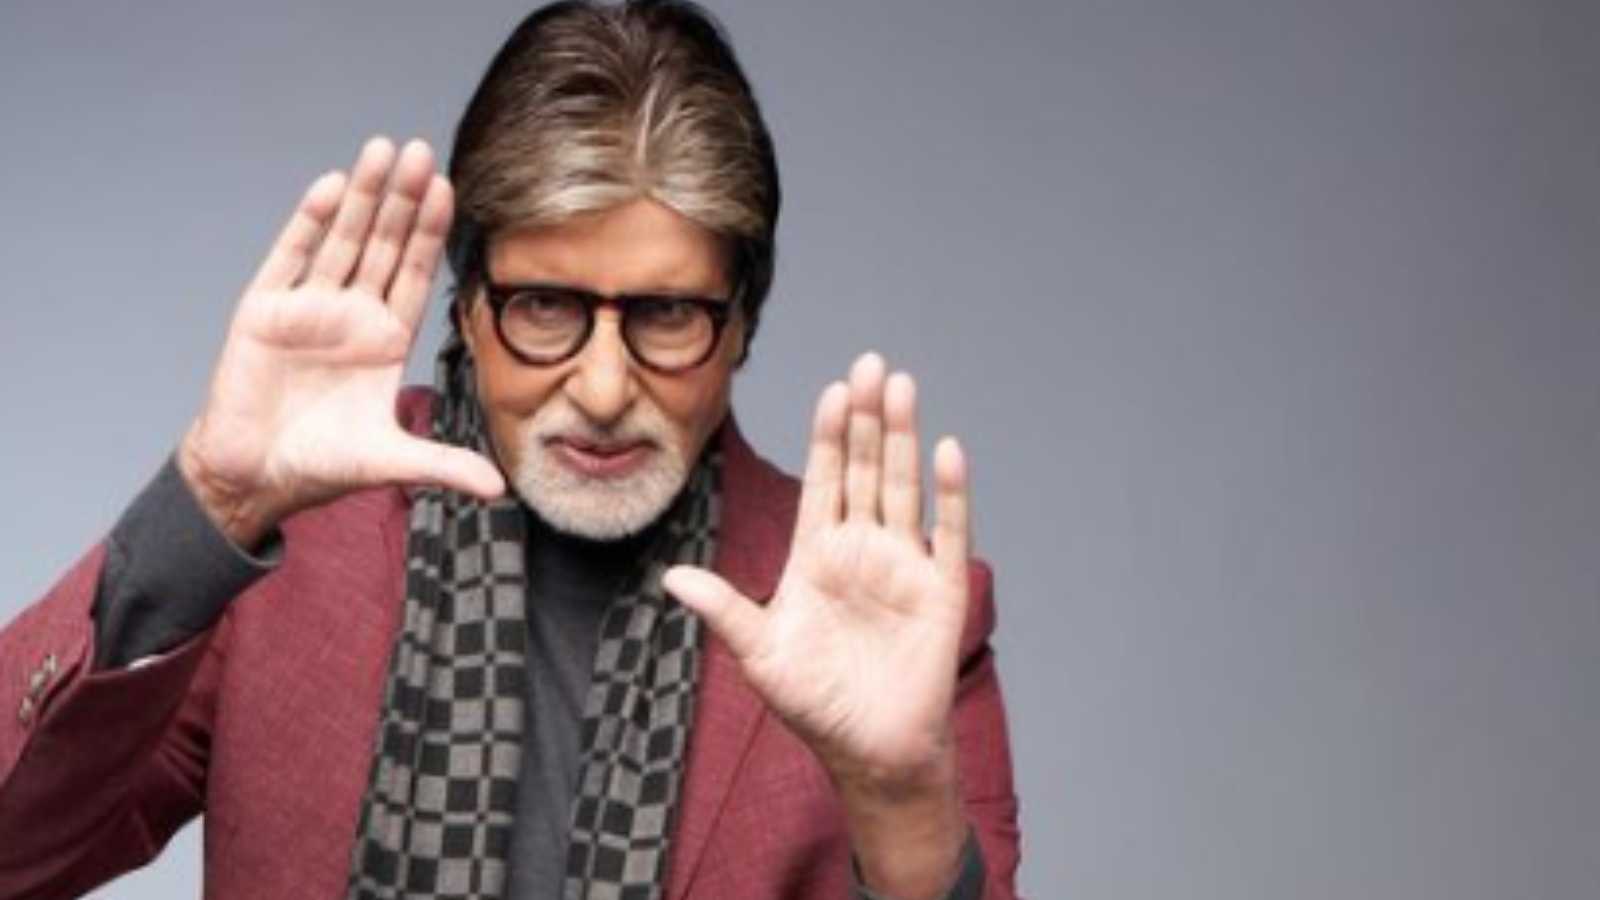 'Koi inse mobile lo re' : Fans react to Amitabh Bachchan tweeting at 2 am in the night asking if it's a good time to tweet